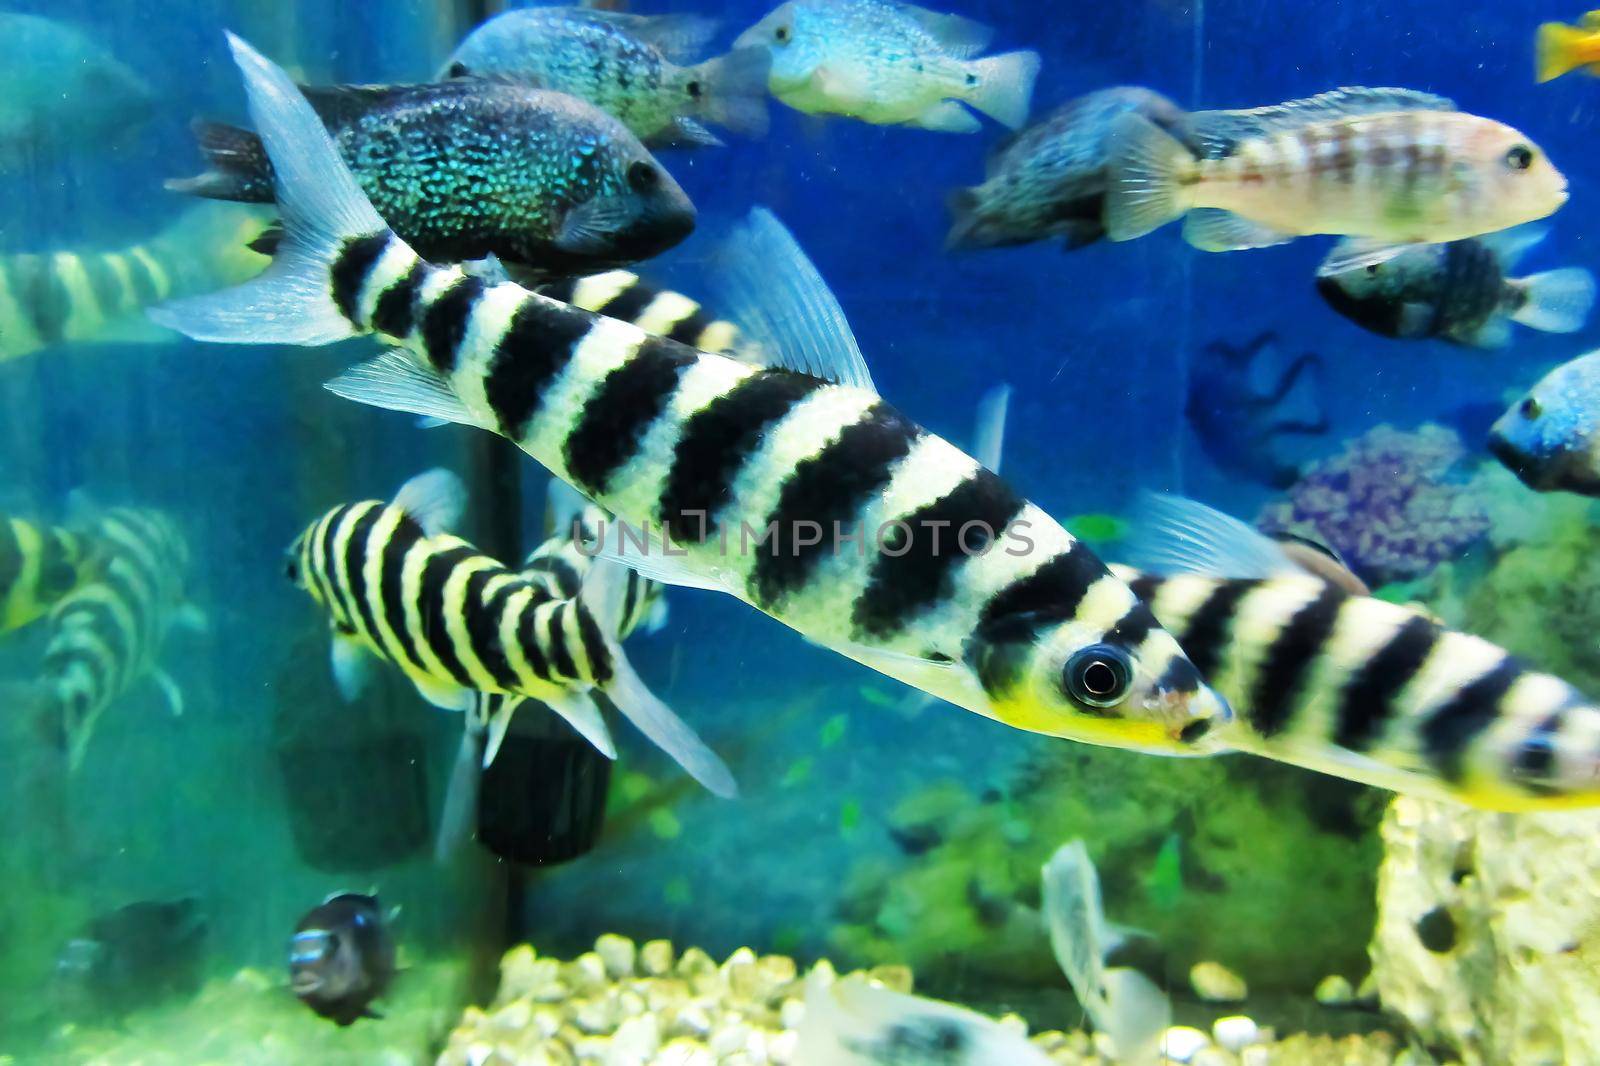 A colorful of banded leporinus in freshwater aquarium. Leporinus fasciatus is a species of freshwater characin fish in the family Anostomidae.